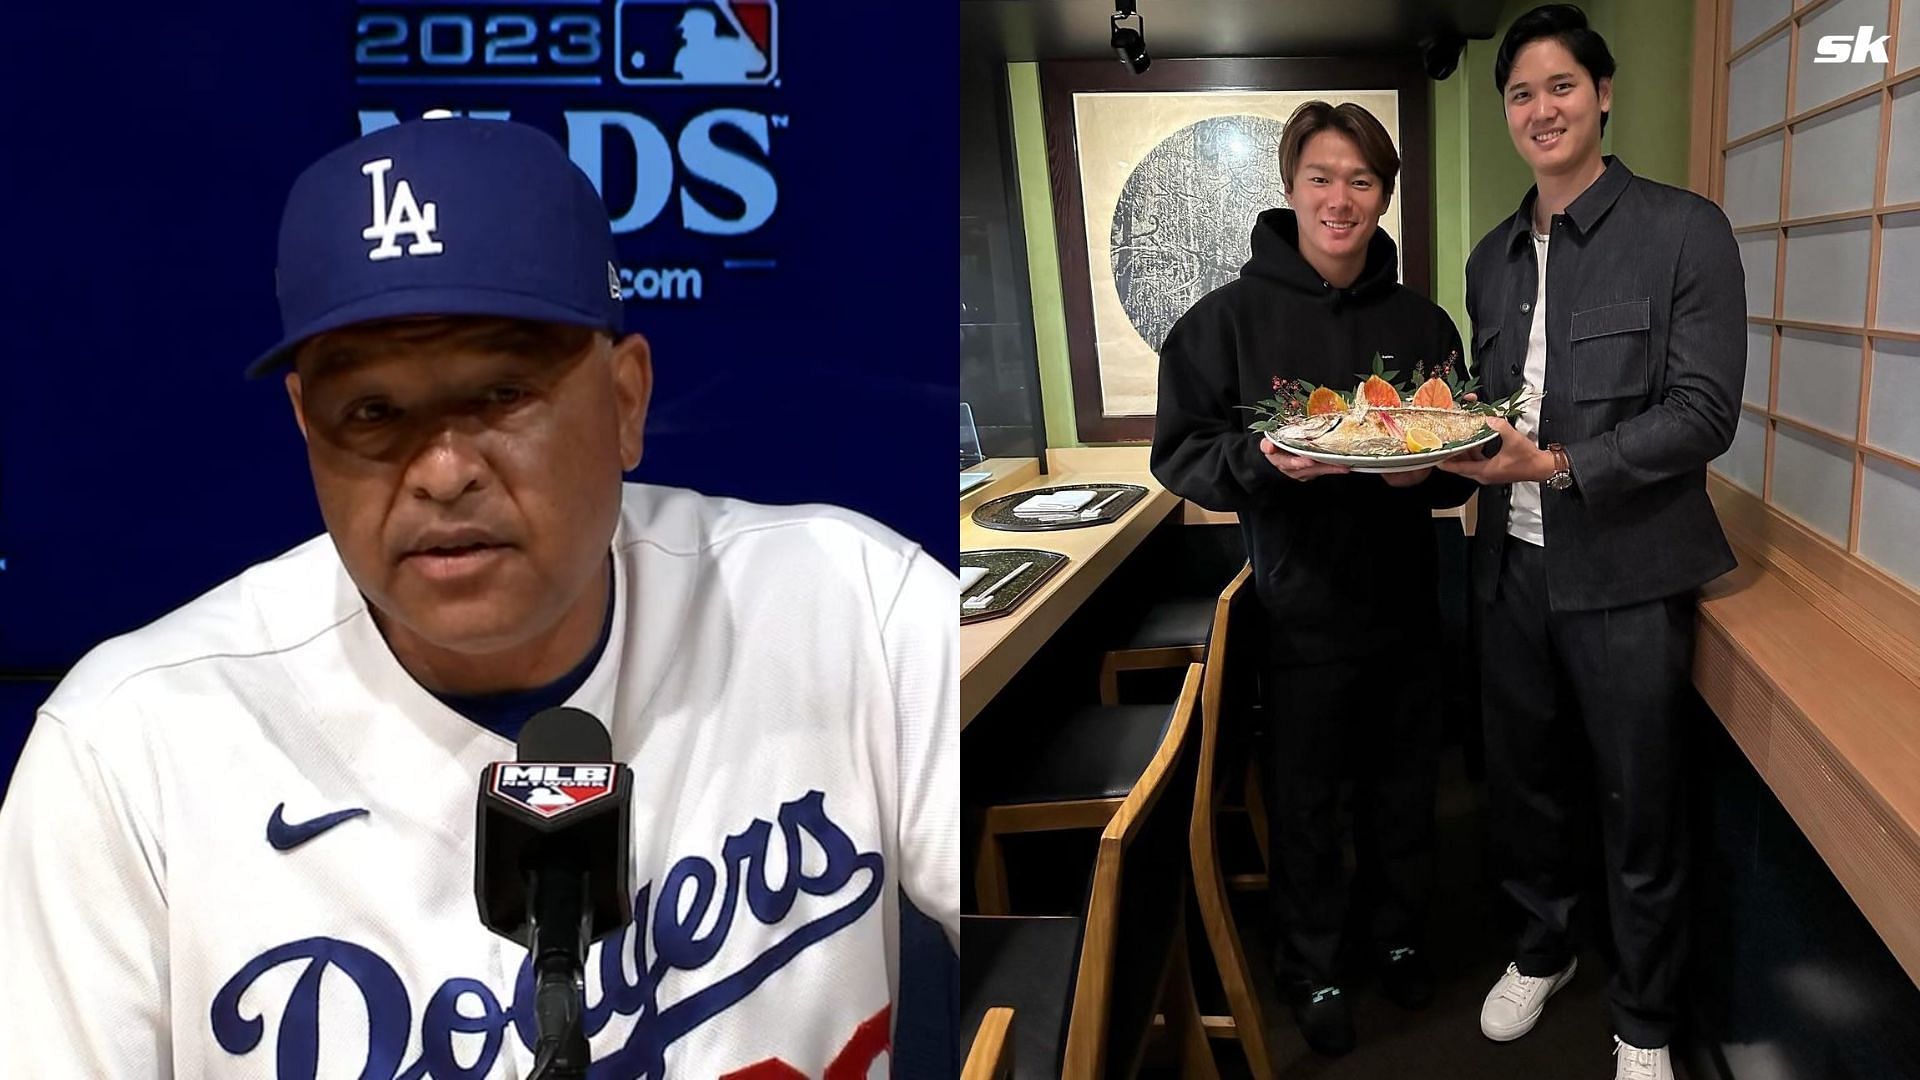 Dave Roberts talks about his role during the spring training with all the new additions